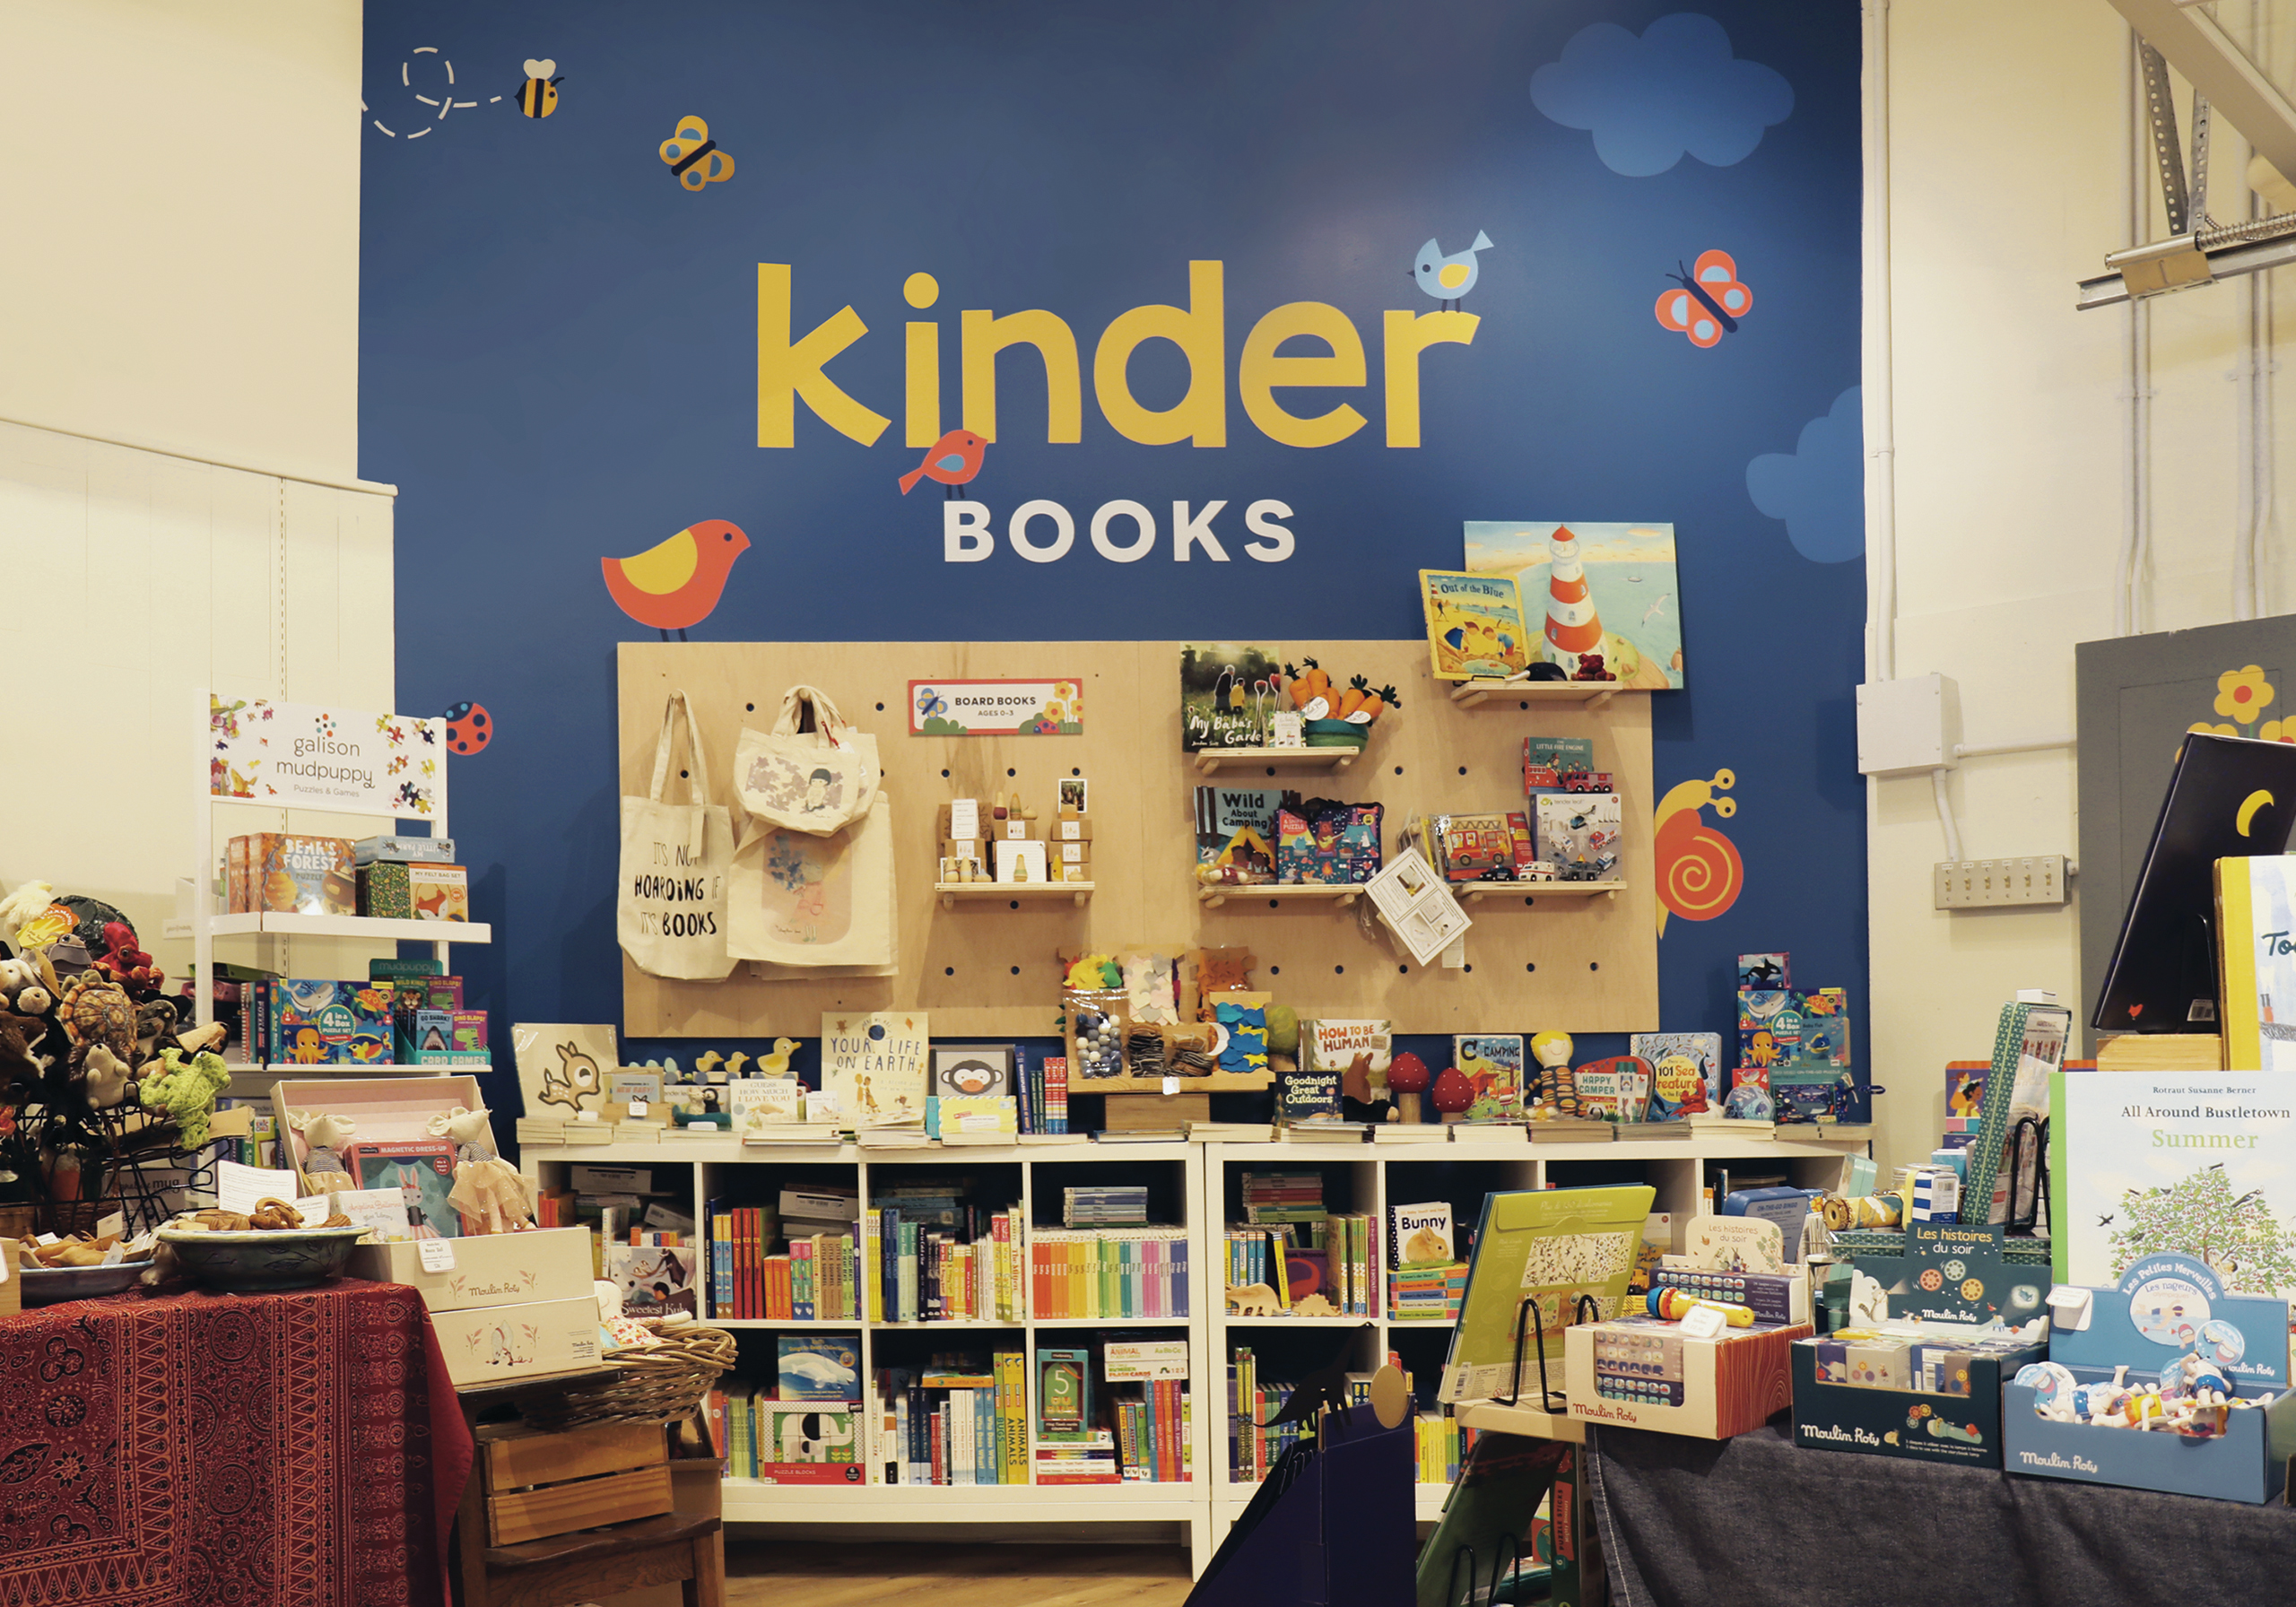 Kinder Books Store front